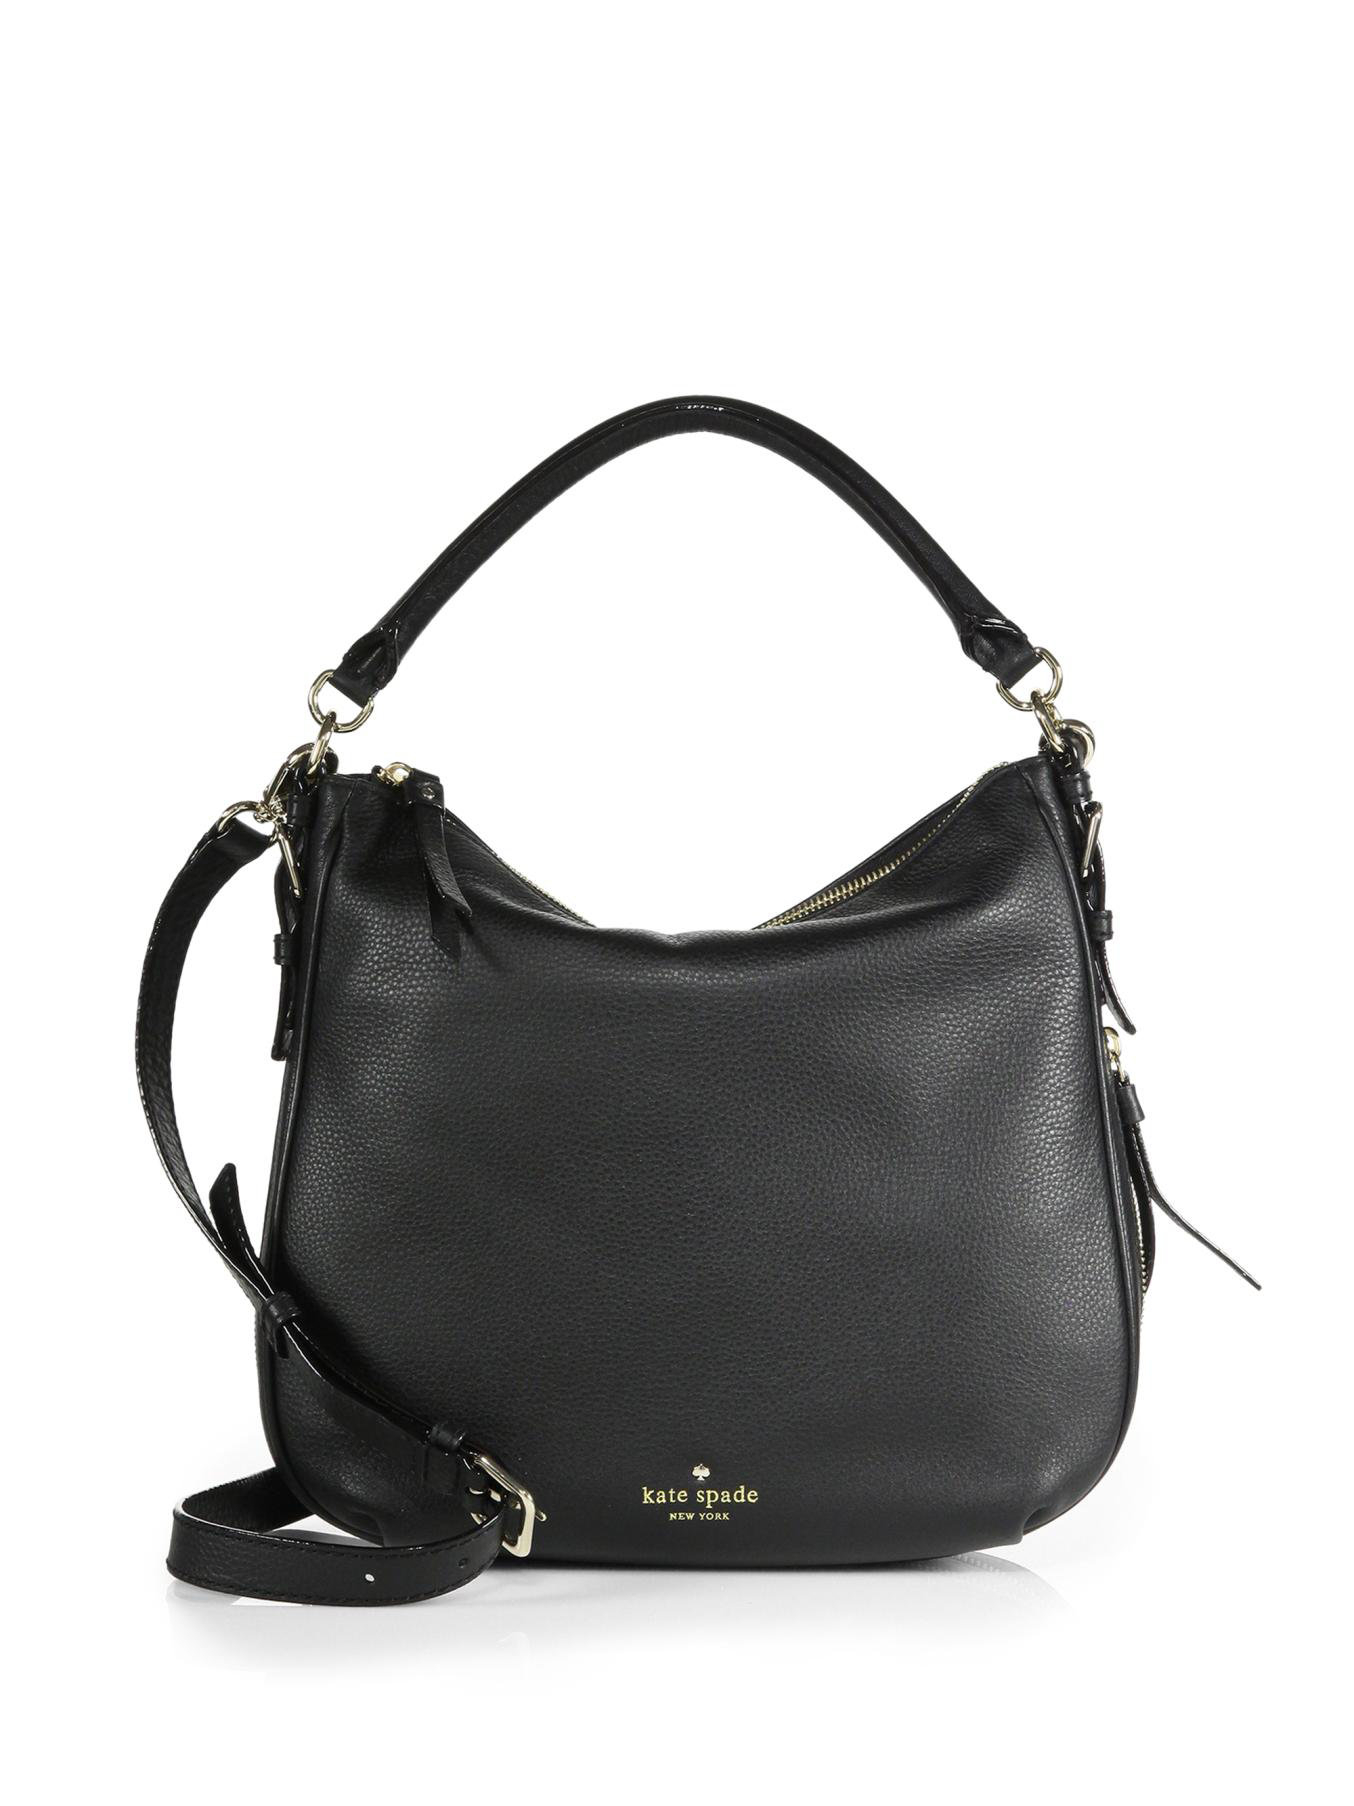 Lyst - Kate spade new york Cobble Hill Leather Hobo in Black